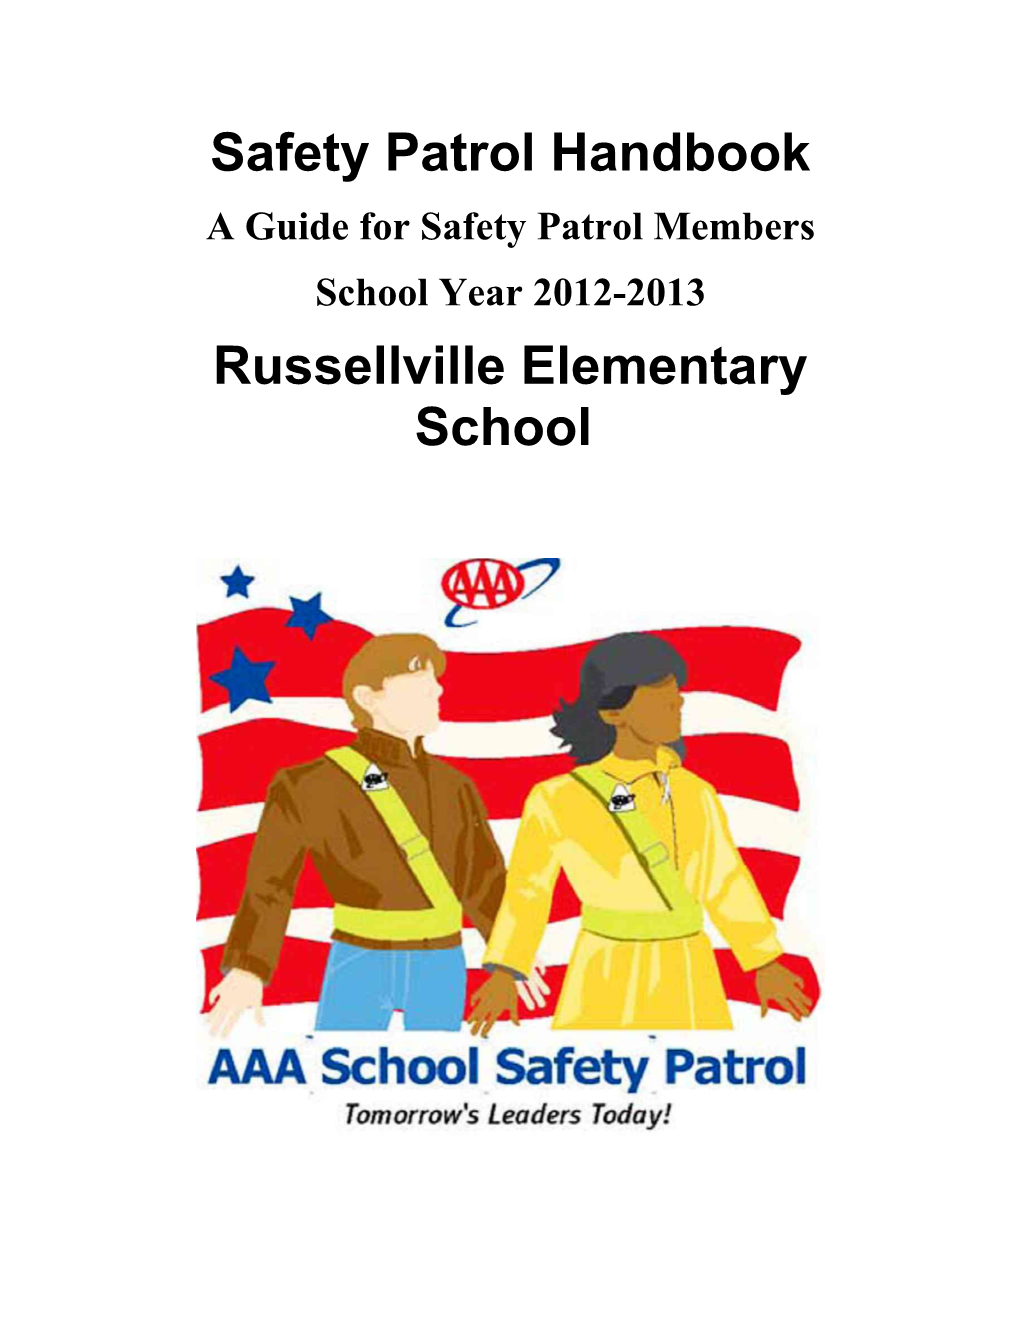 A Guide for Safety Patrol Members